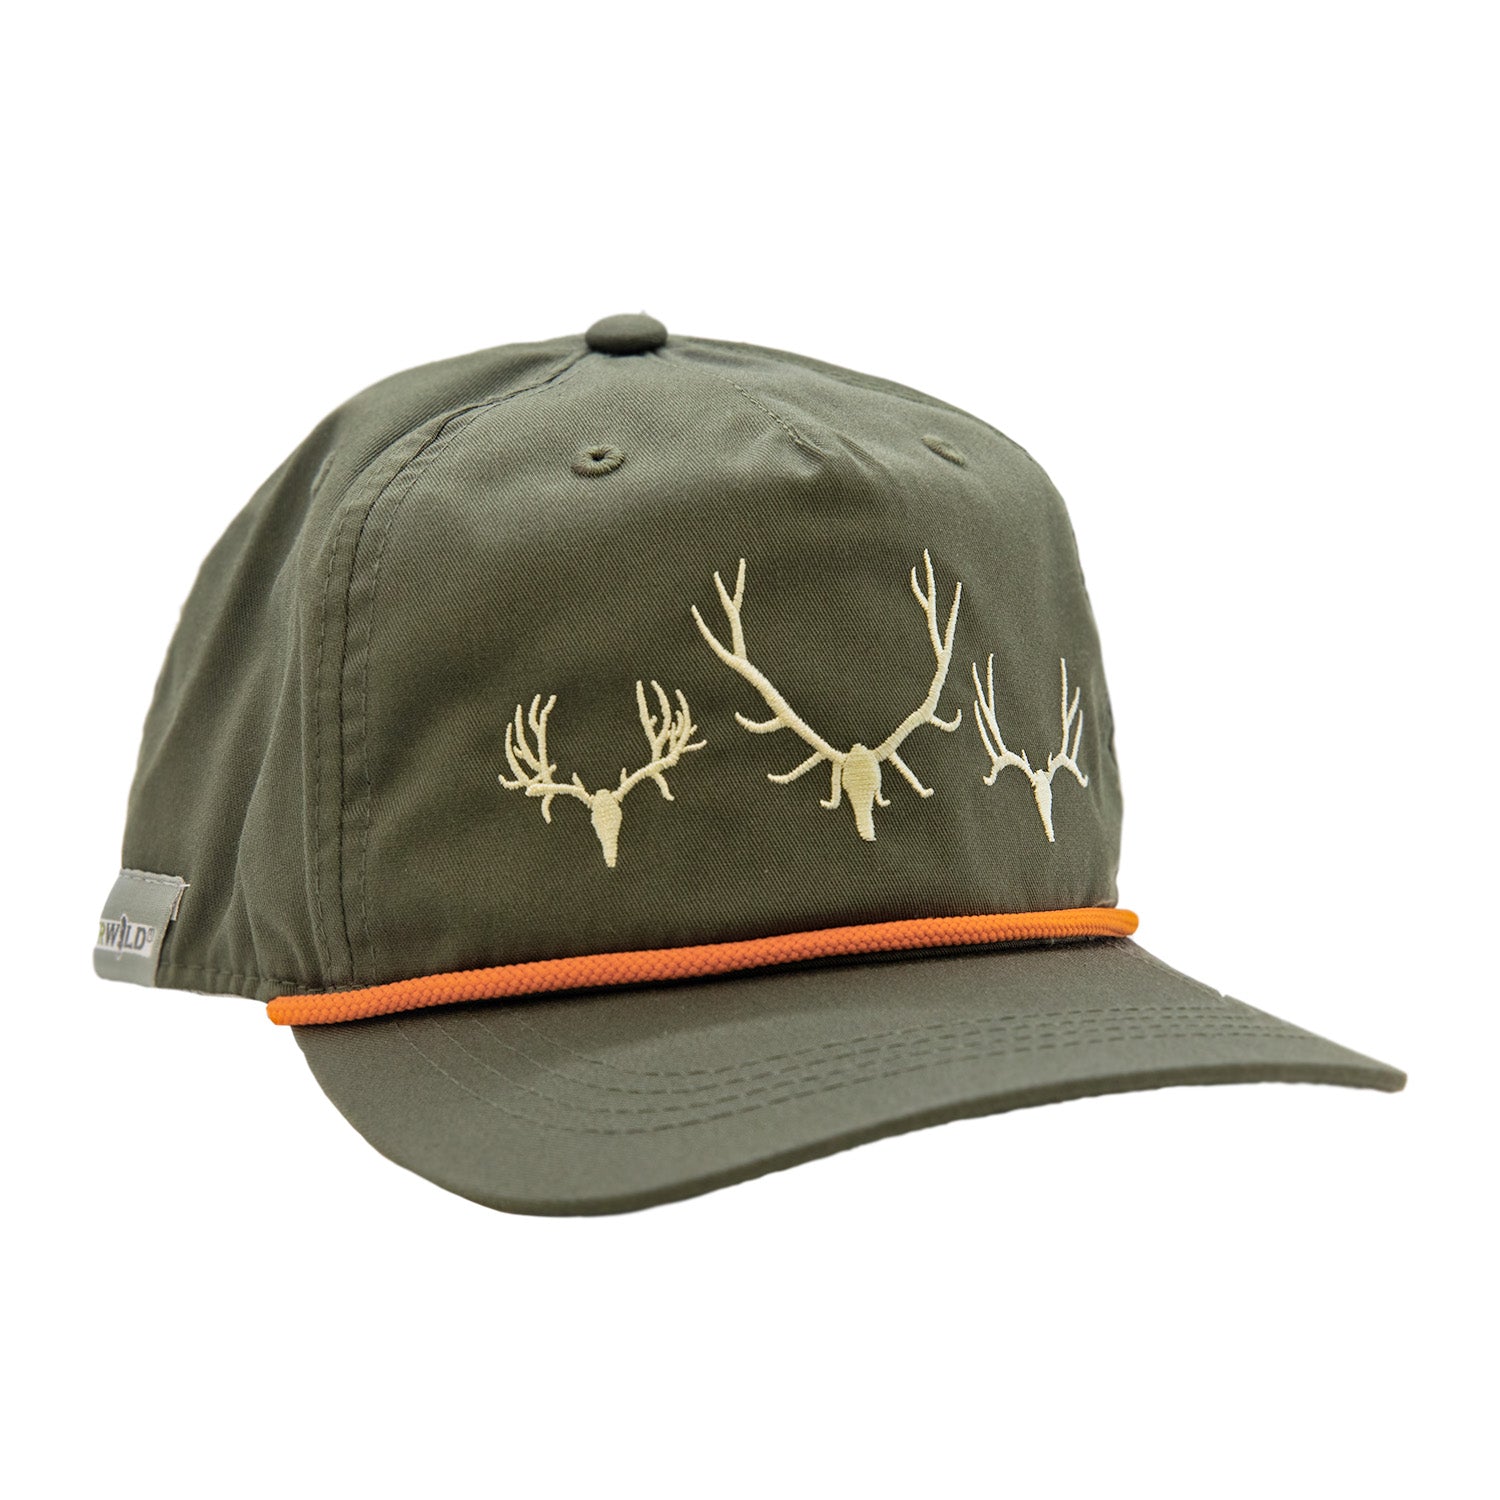 Green Full cloth hat with orange rope. on the front shows the skulls of an elk, mule deer and whitetail deer in off white